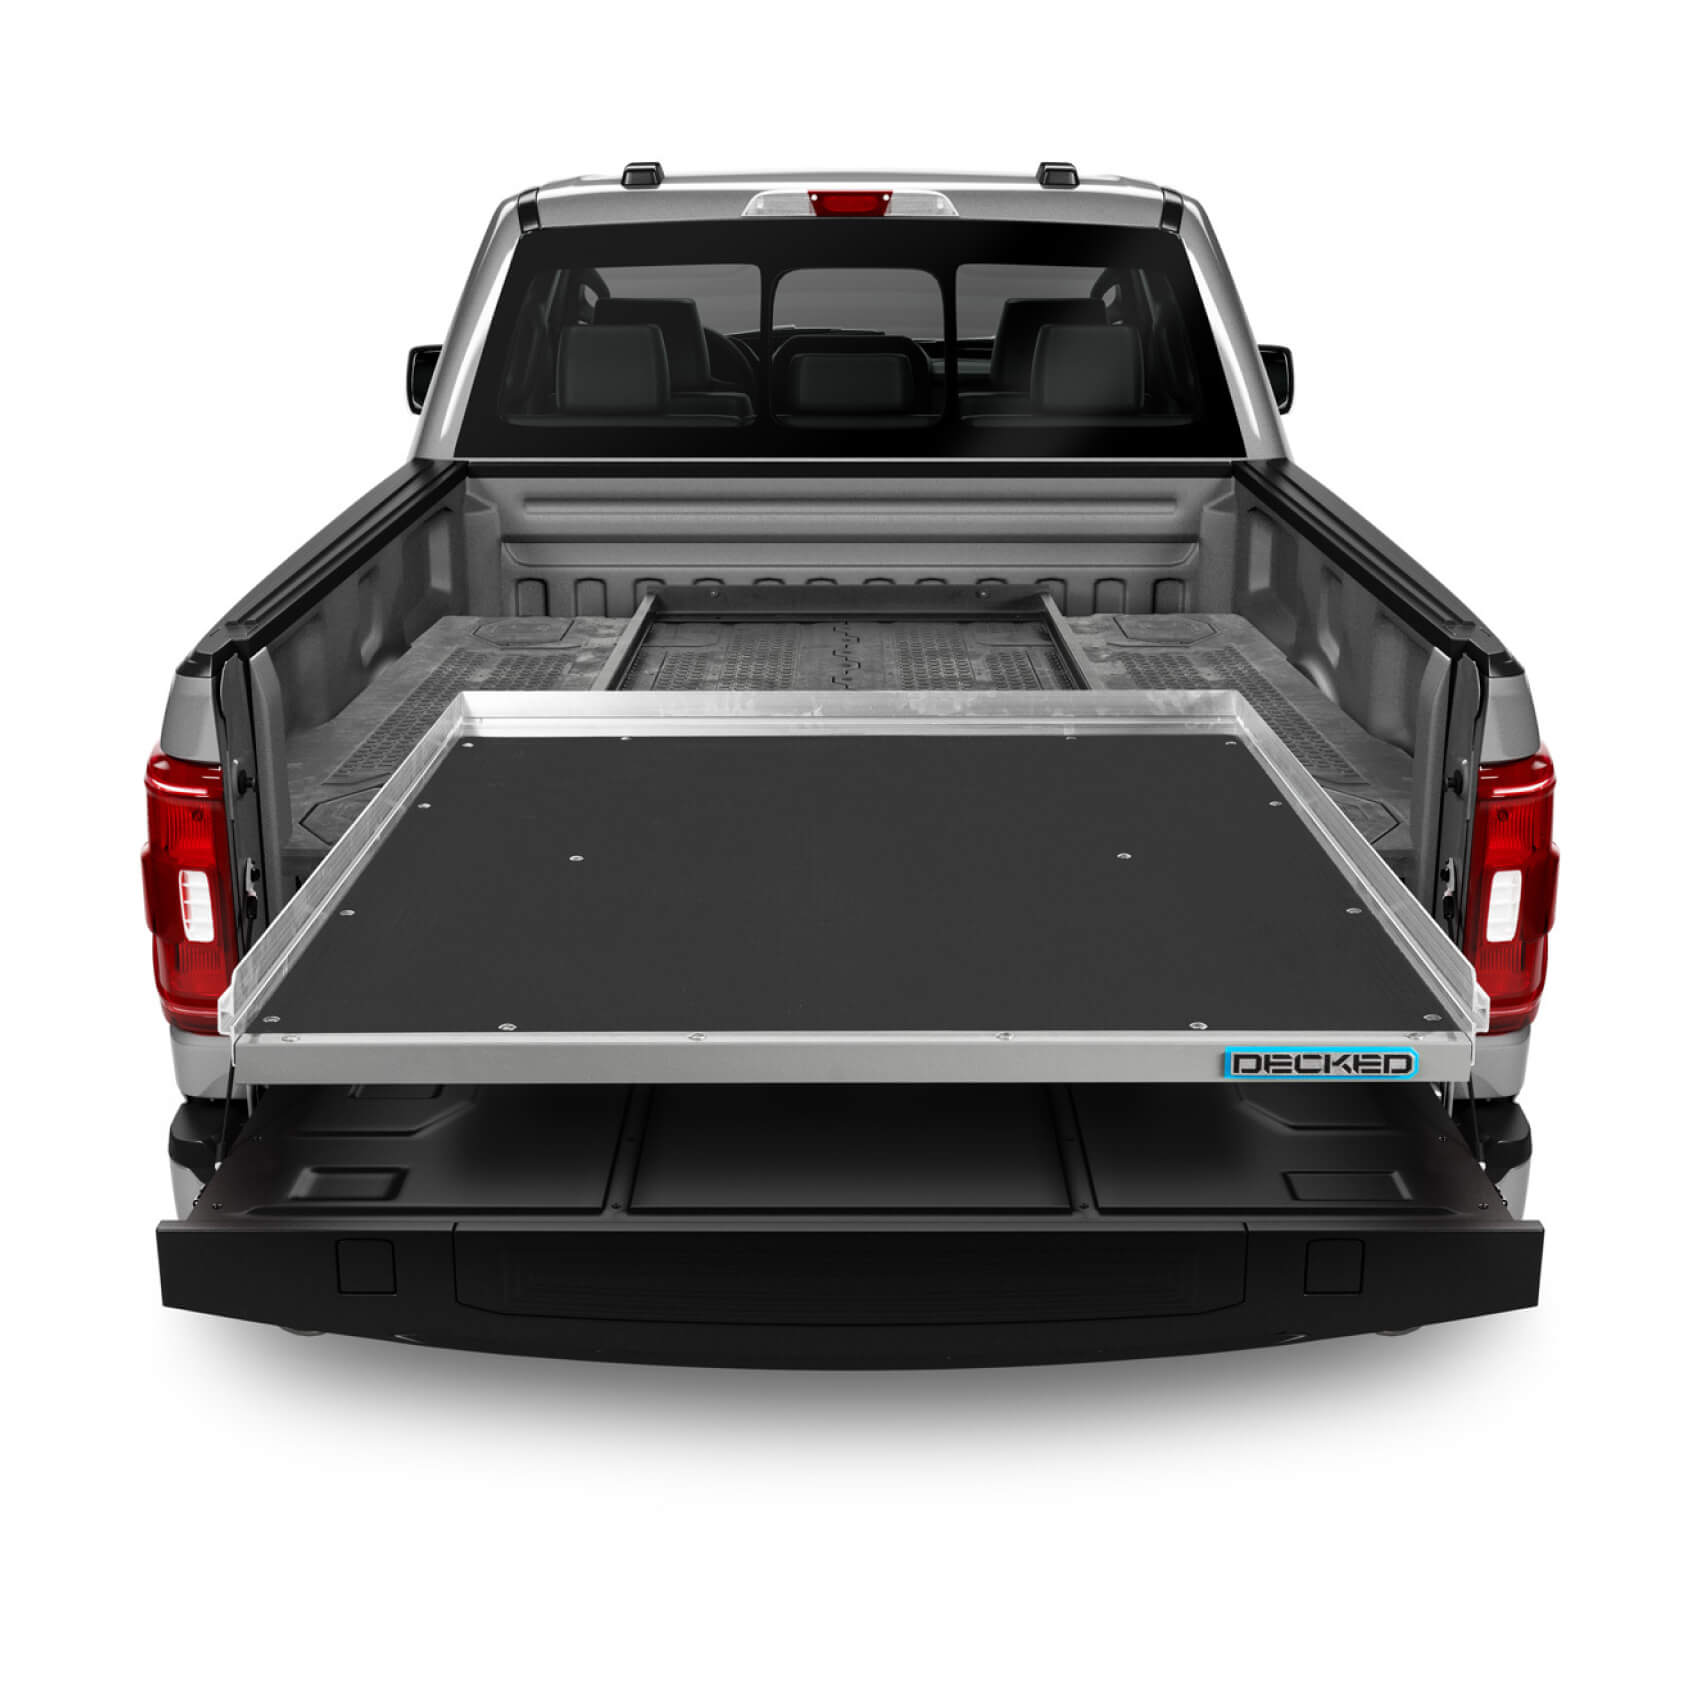 OffroadAlliance.com - Pack up and head out! The Decked drawer system is  great for so many applications. Hunting, fishing, camping, working, and  much more. Possibly the best way to organize your bed